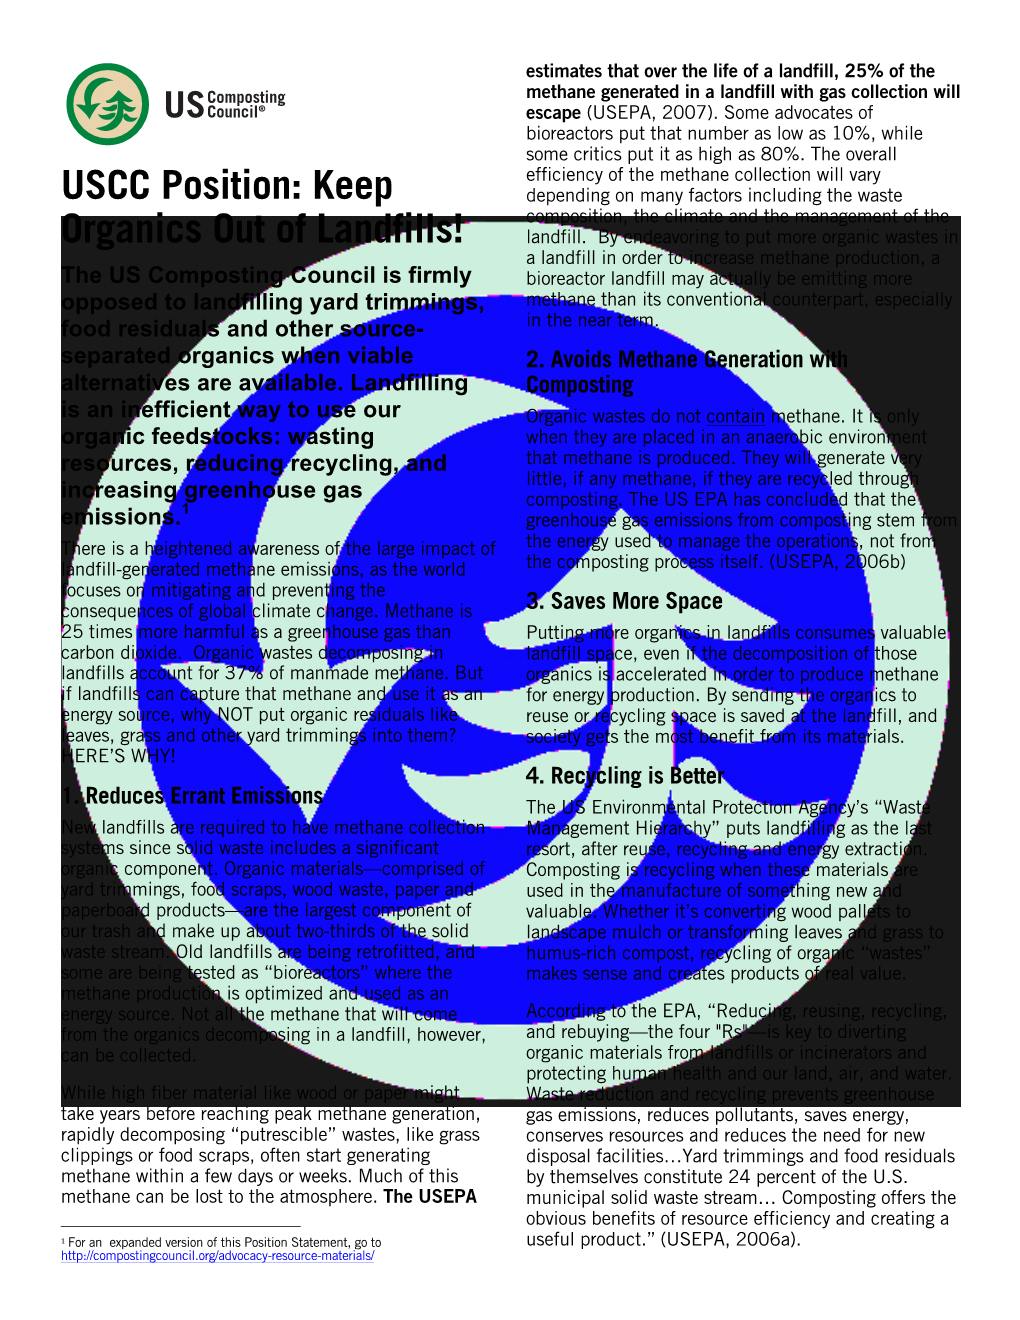 USCC Position: Keep Organics out of Landfills!